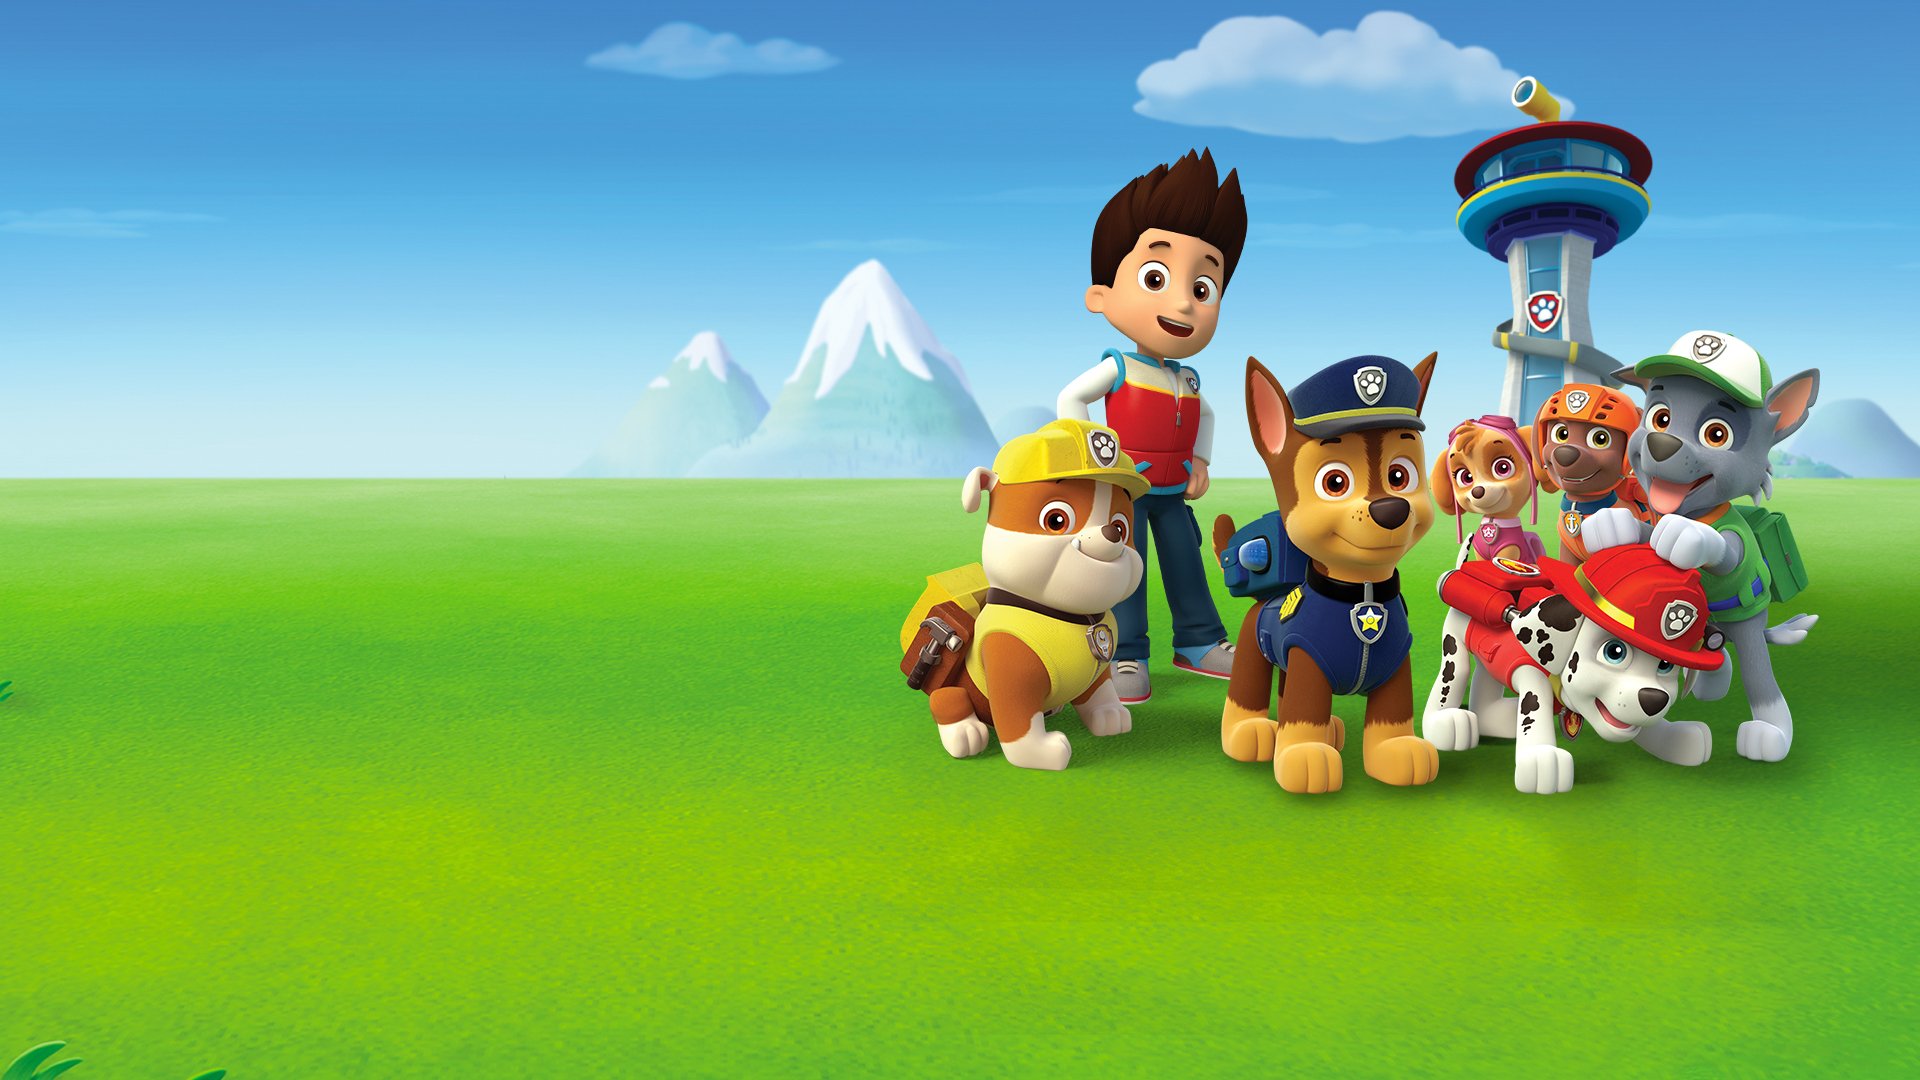 Paw Patrol Backgrounds.